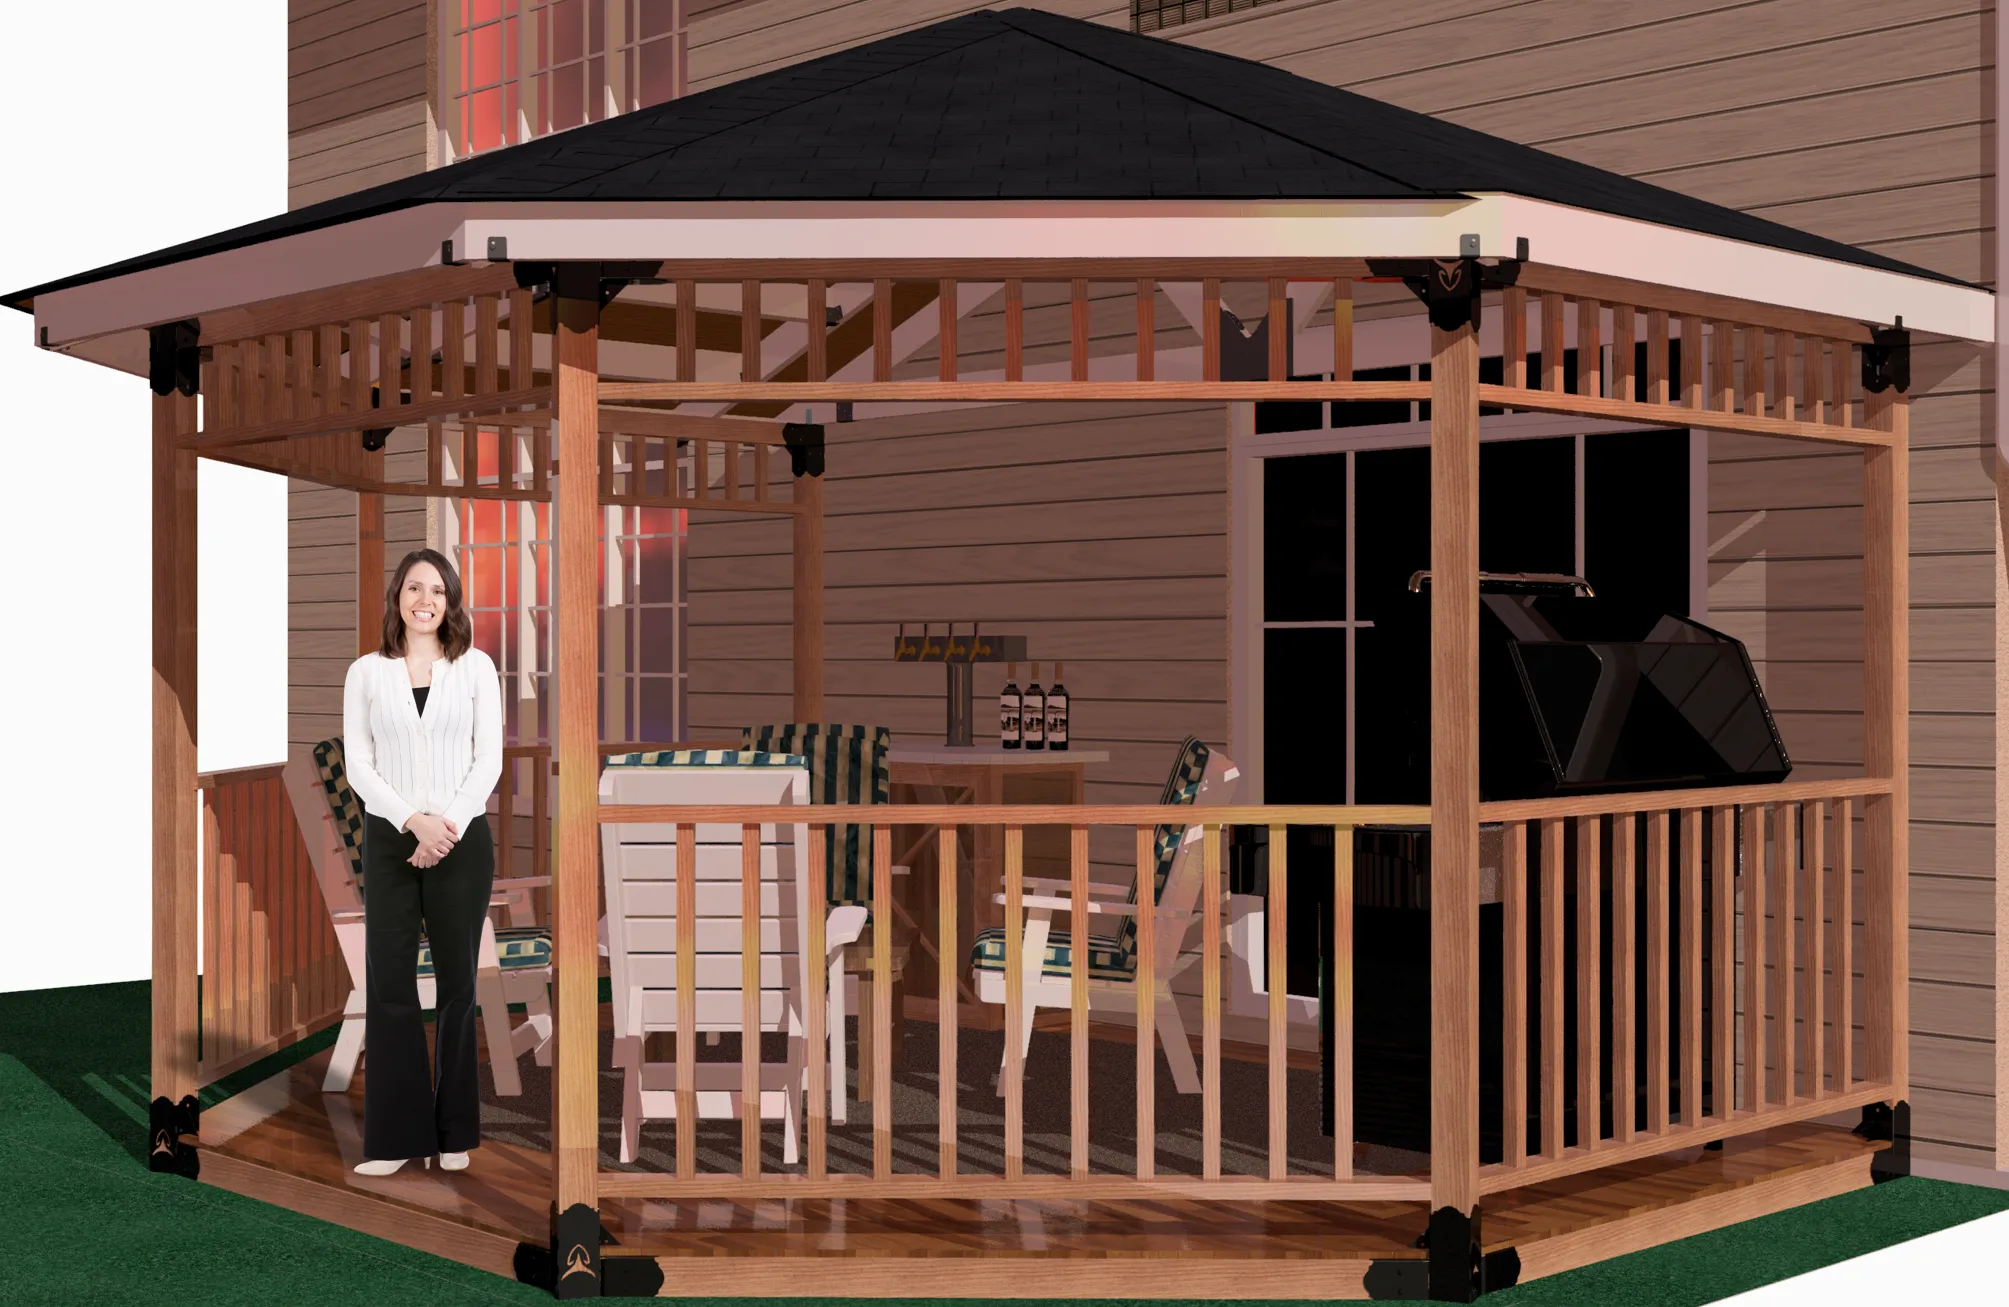 view of a DIY 4x4 wall attached solid roofed partial octagon gazebo. A bar with beer taps & wine bottles, barbecuer, and casual furniture inside and a smiling girl standing inside it.